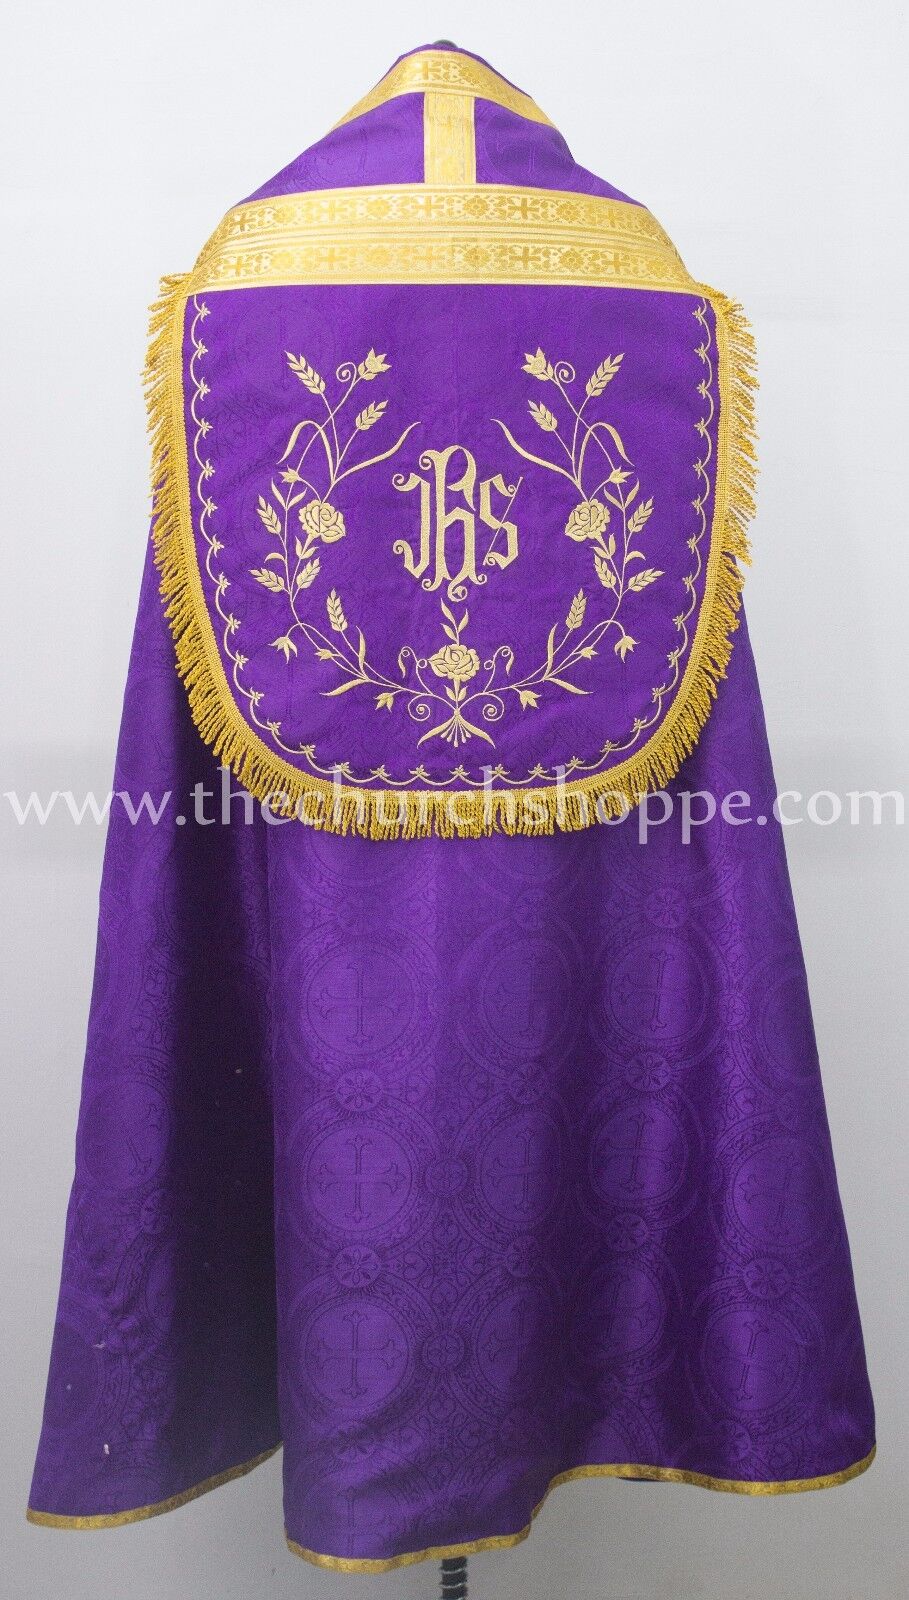 New Violet Cope & Stole Set with IHS embroidery,capa pluvial,chape,far fronte